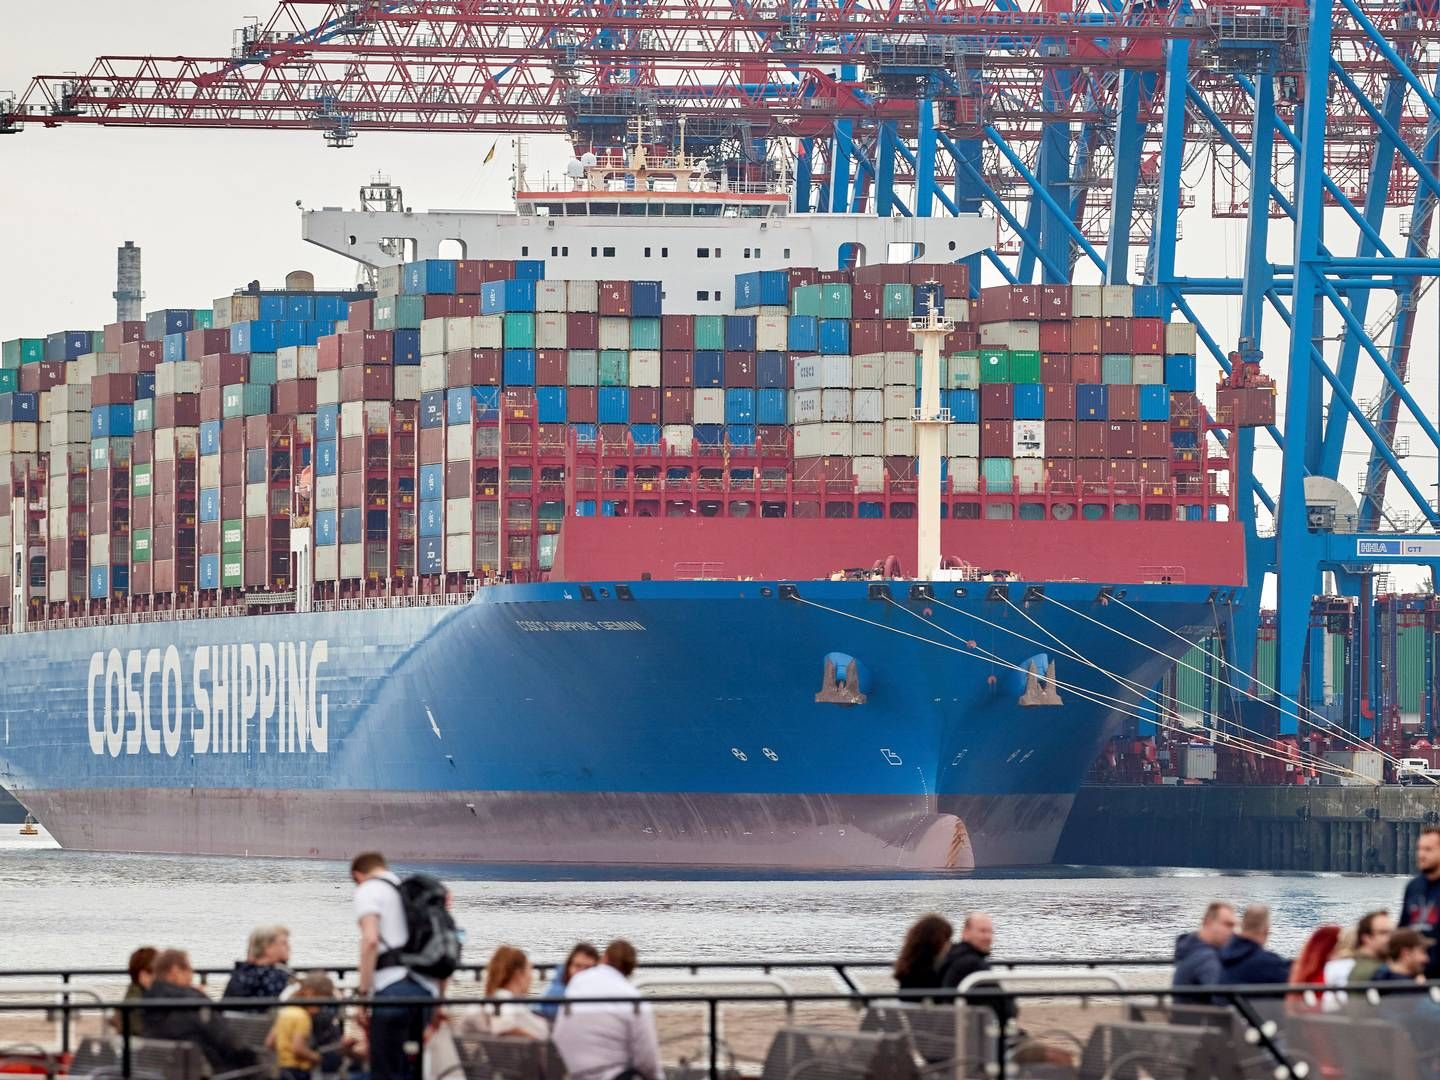 China's Cosco Shipping Holdings had the best second-quarter earnings ratio. | Photo: Georg Wendt/AP/Ritzau Scanpix